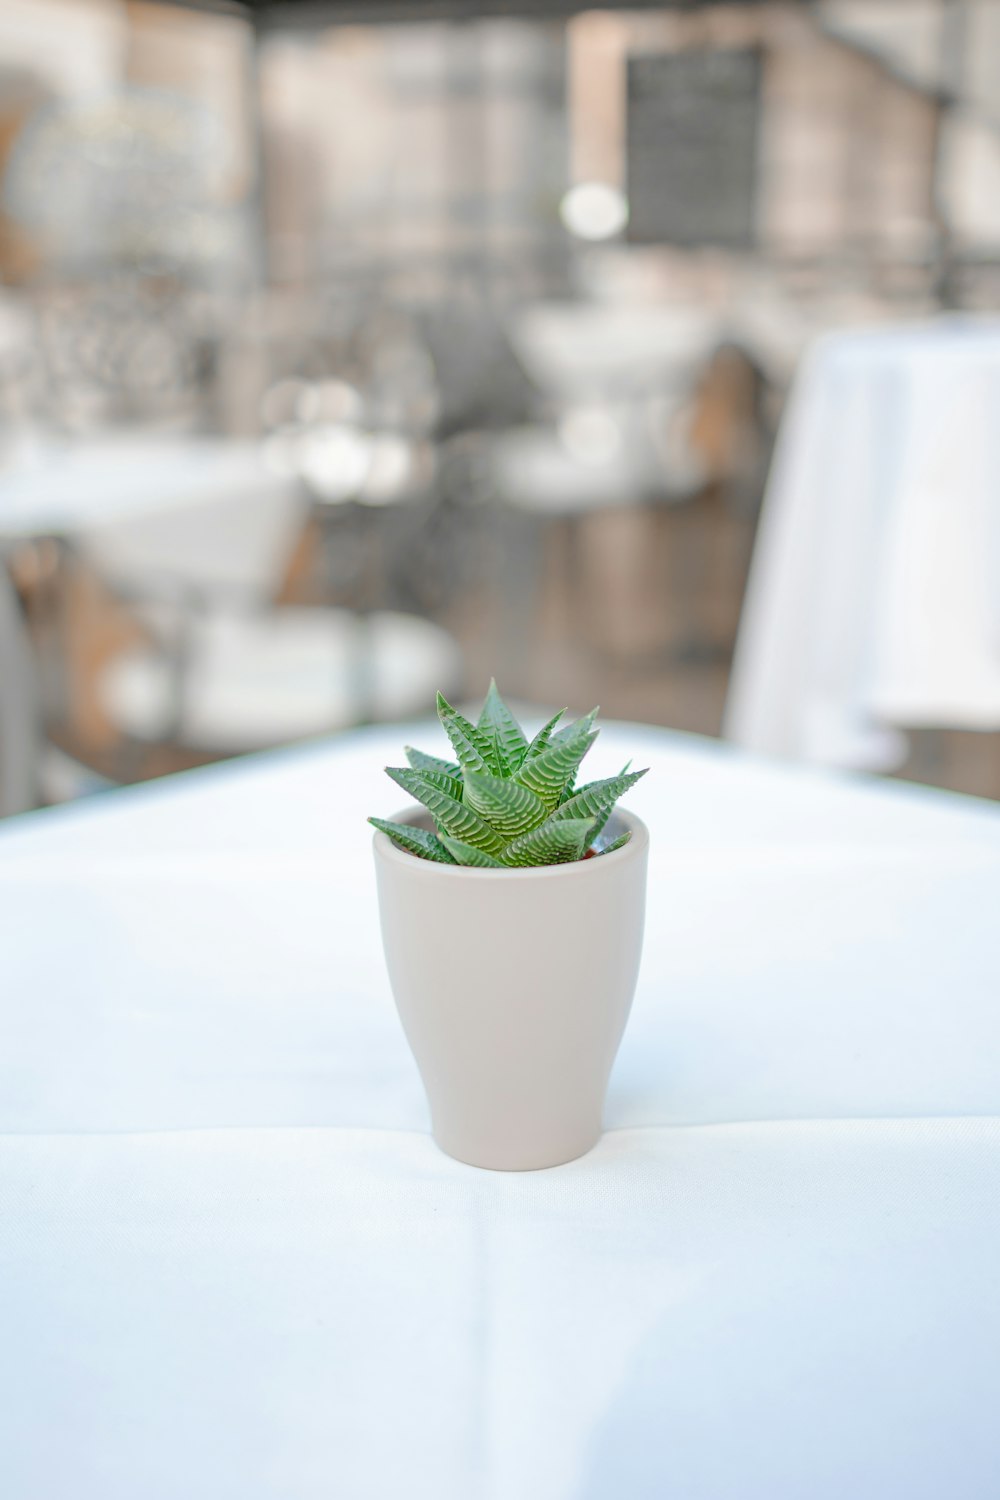 a small plant in a white cup